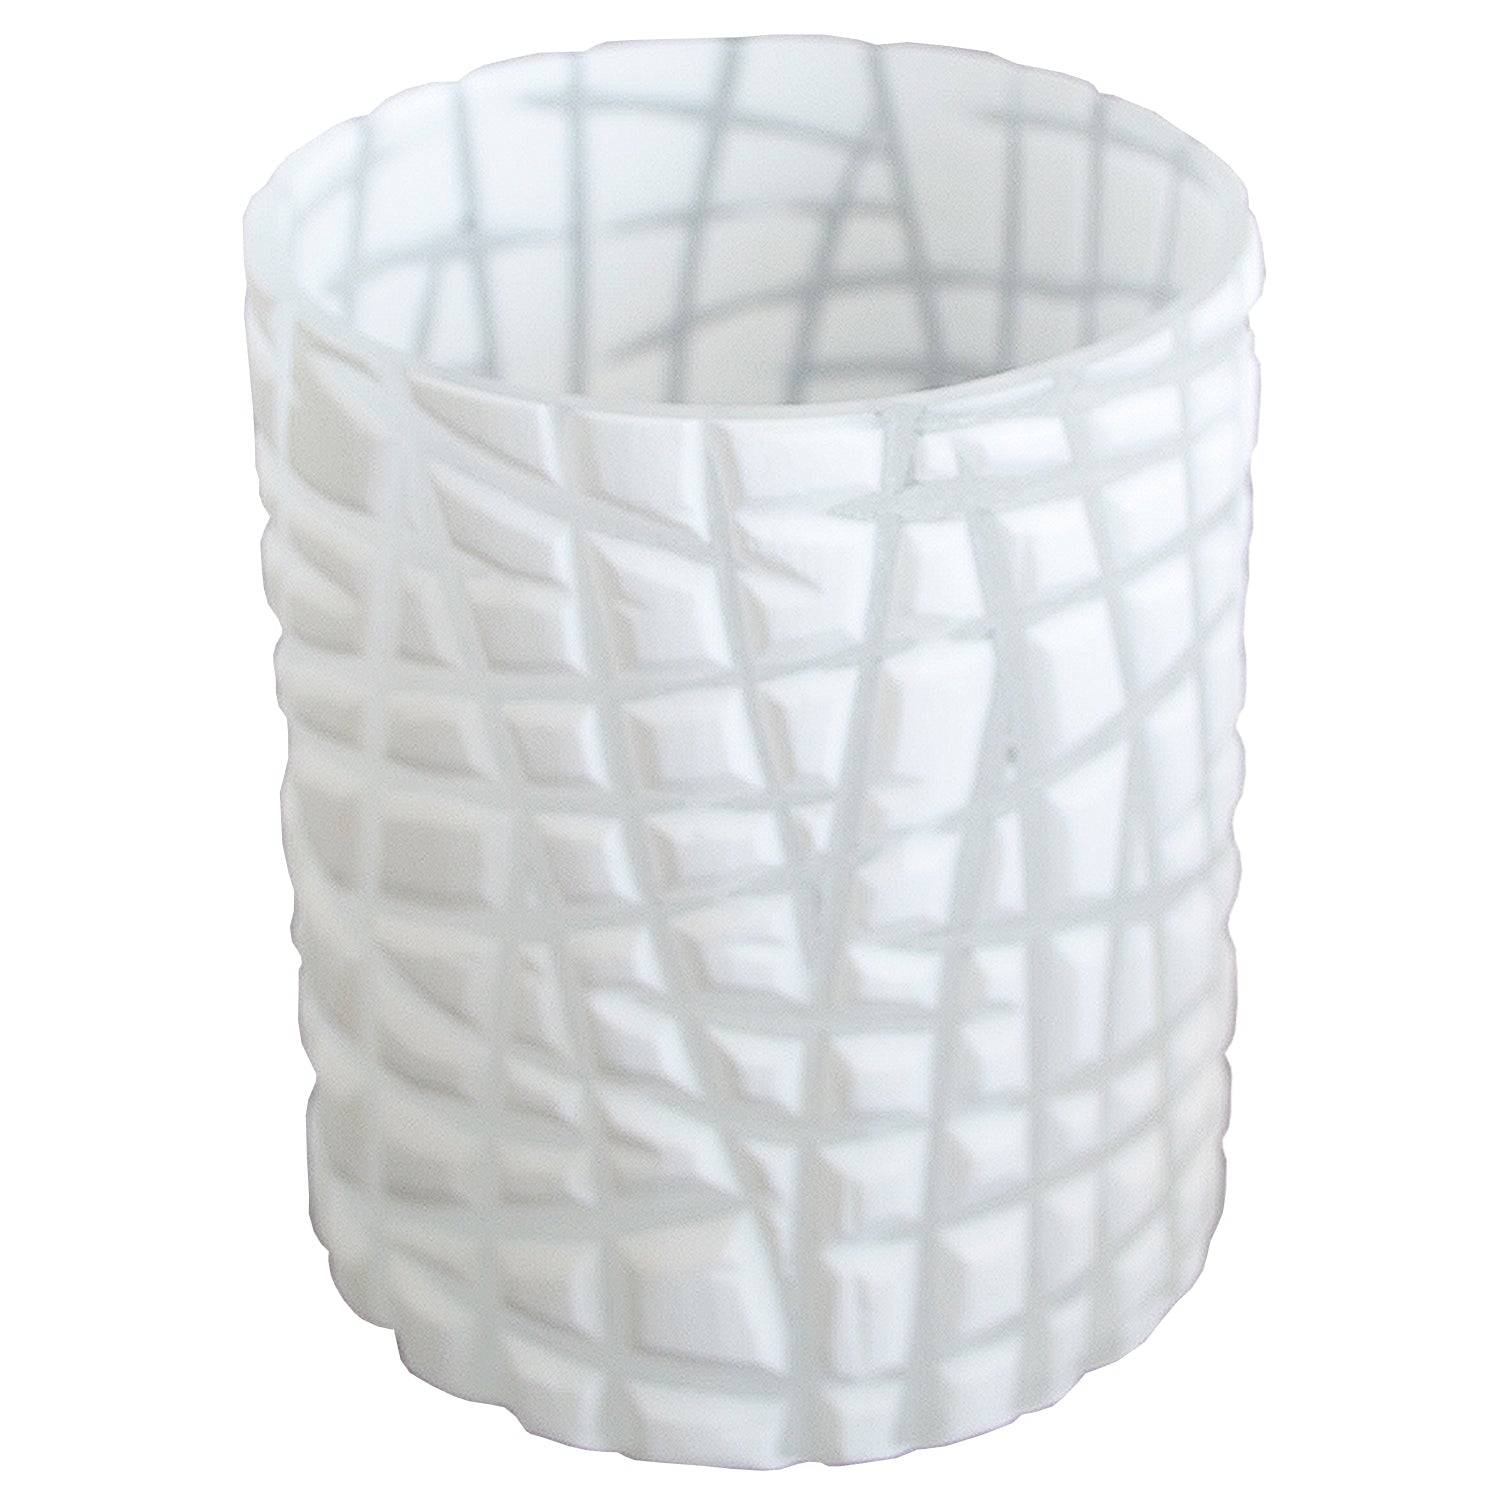 CUT WHITE GLASS CANDLE HOLDER